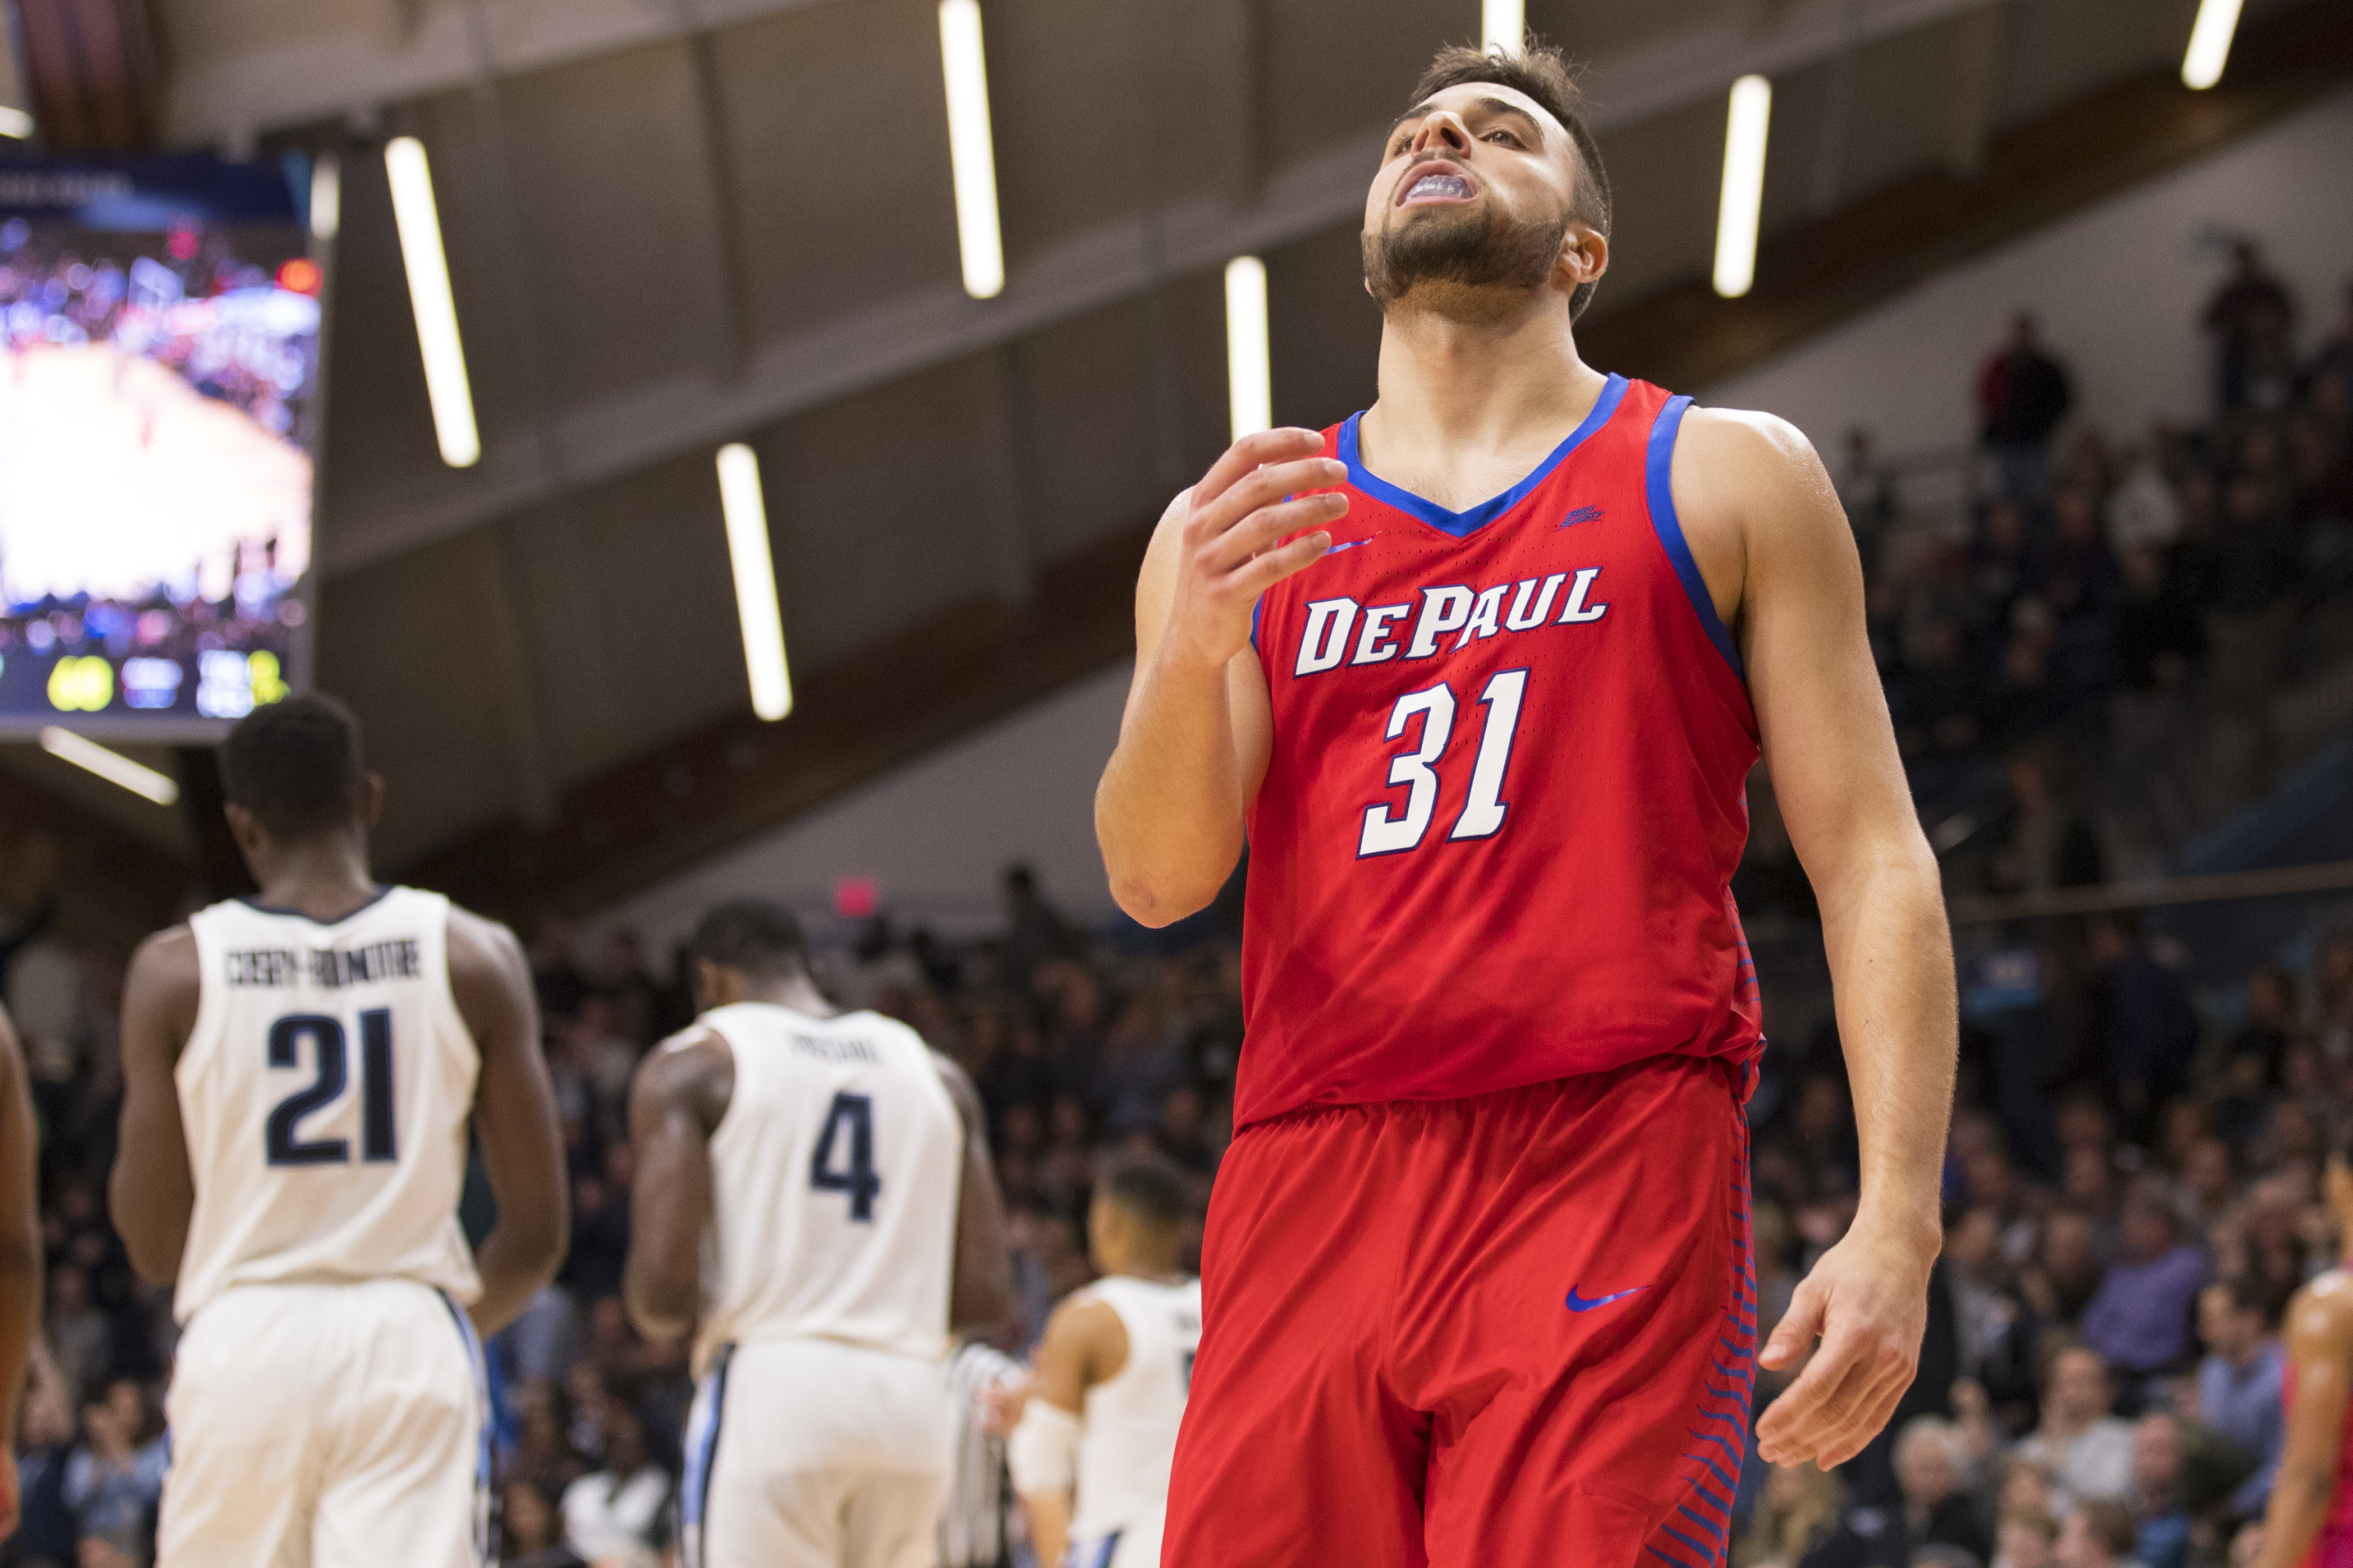 DePaul's Max Strus Receives All-District Honors